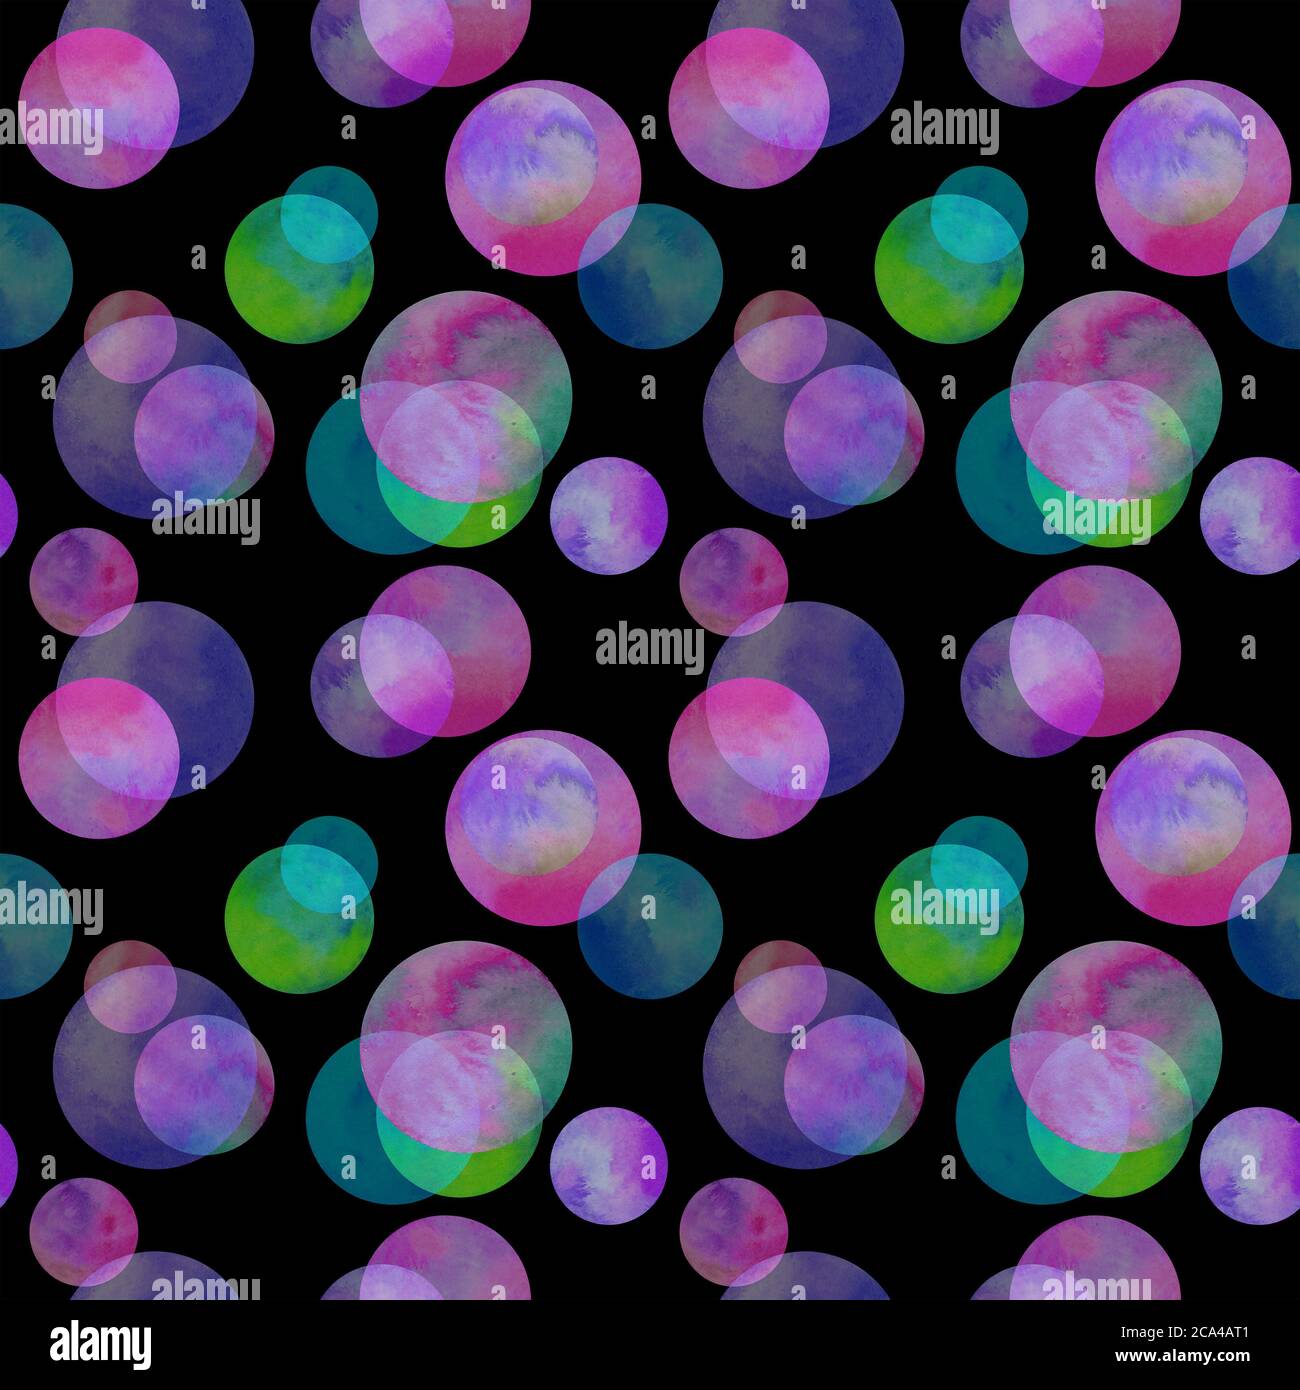 Circles multi-colored neon watercolor seamless pattern. Abstract watercolour background with colorful circles on black. Hand drawn round shaped textur Stock Photo